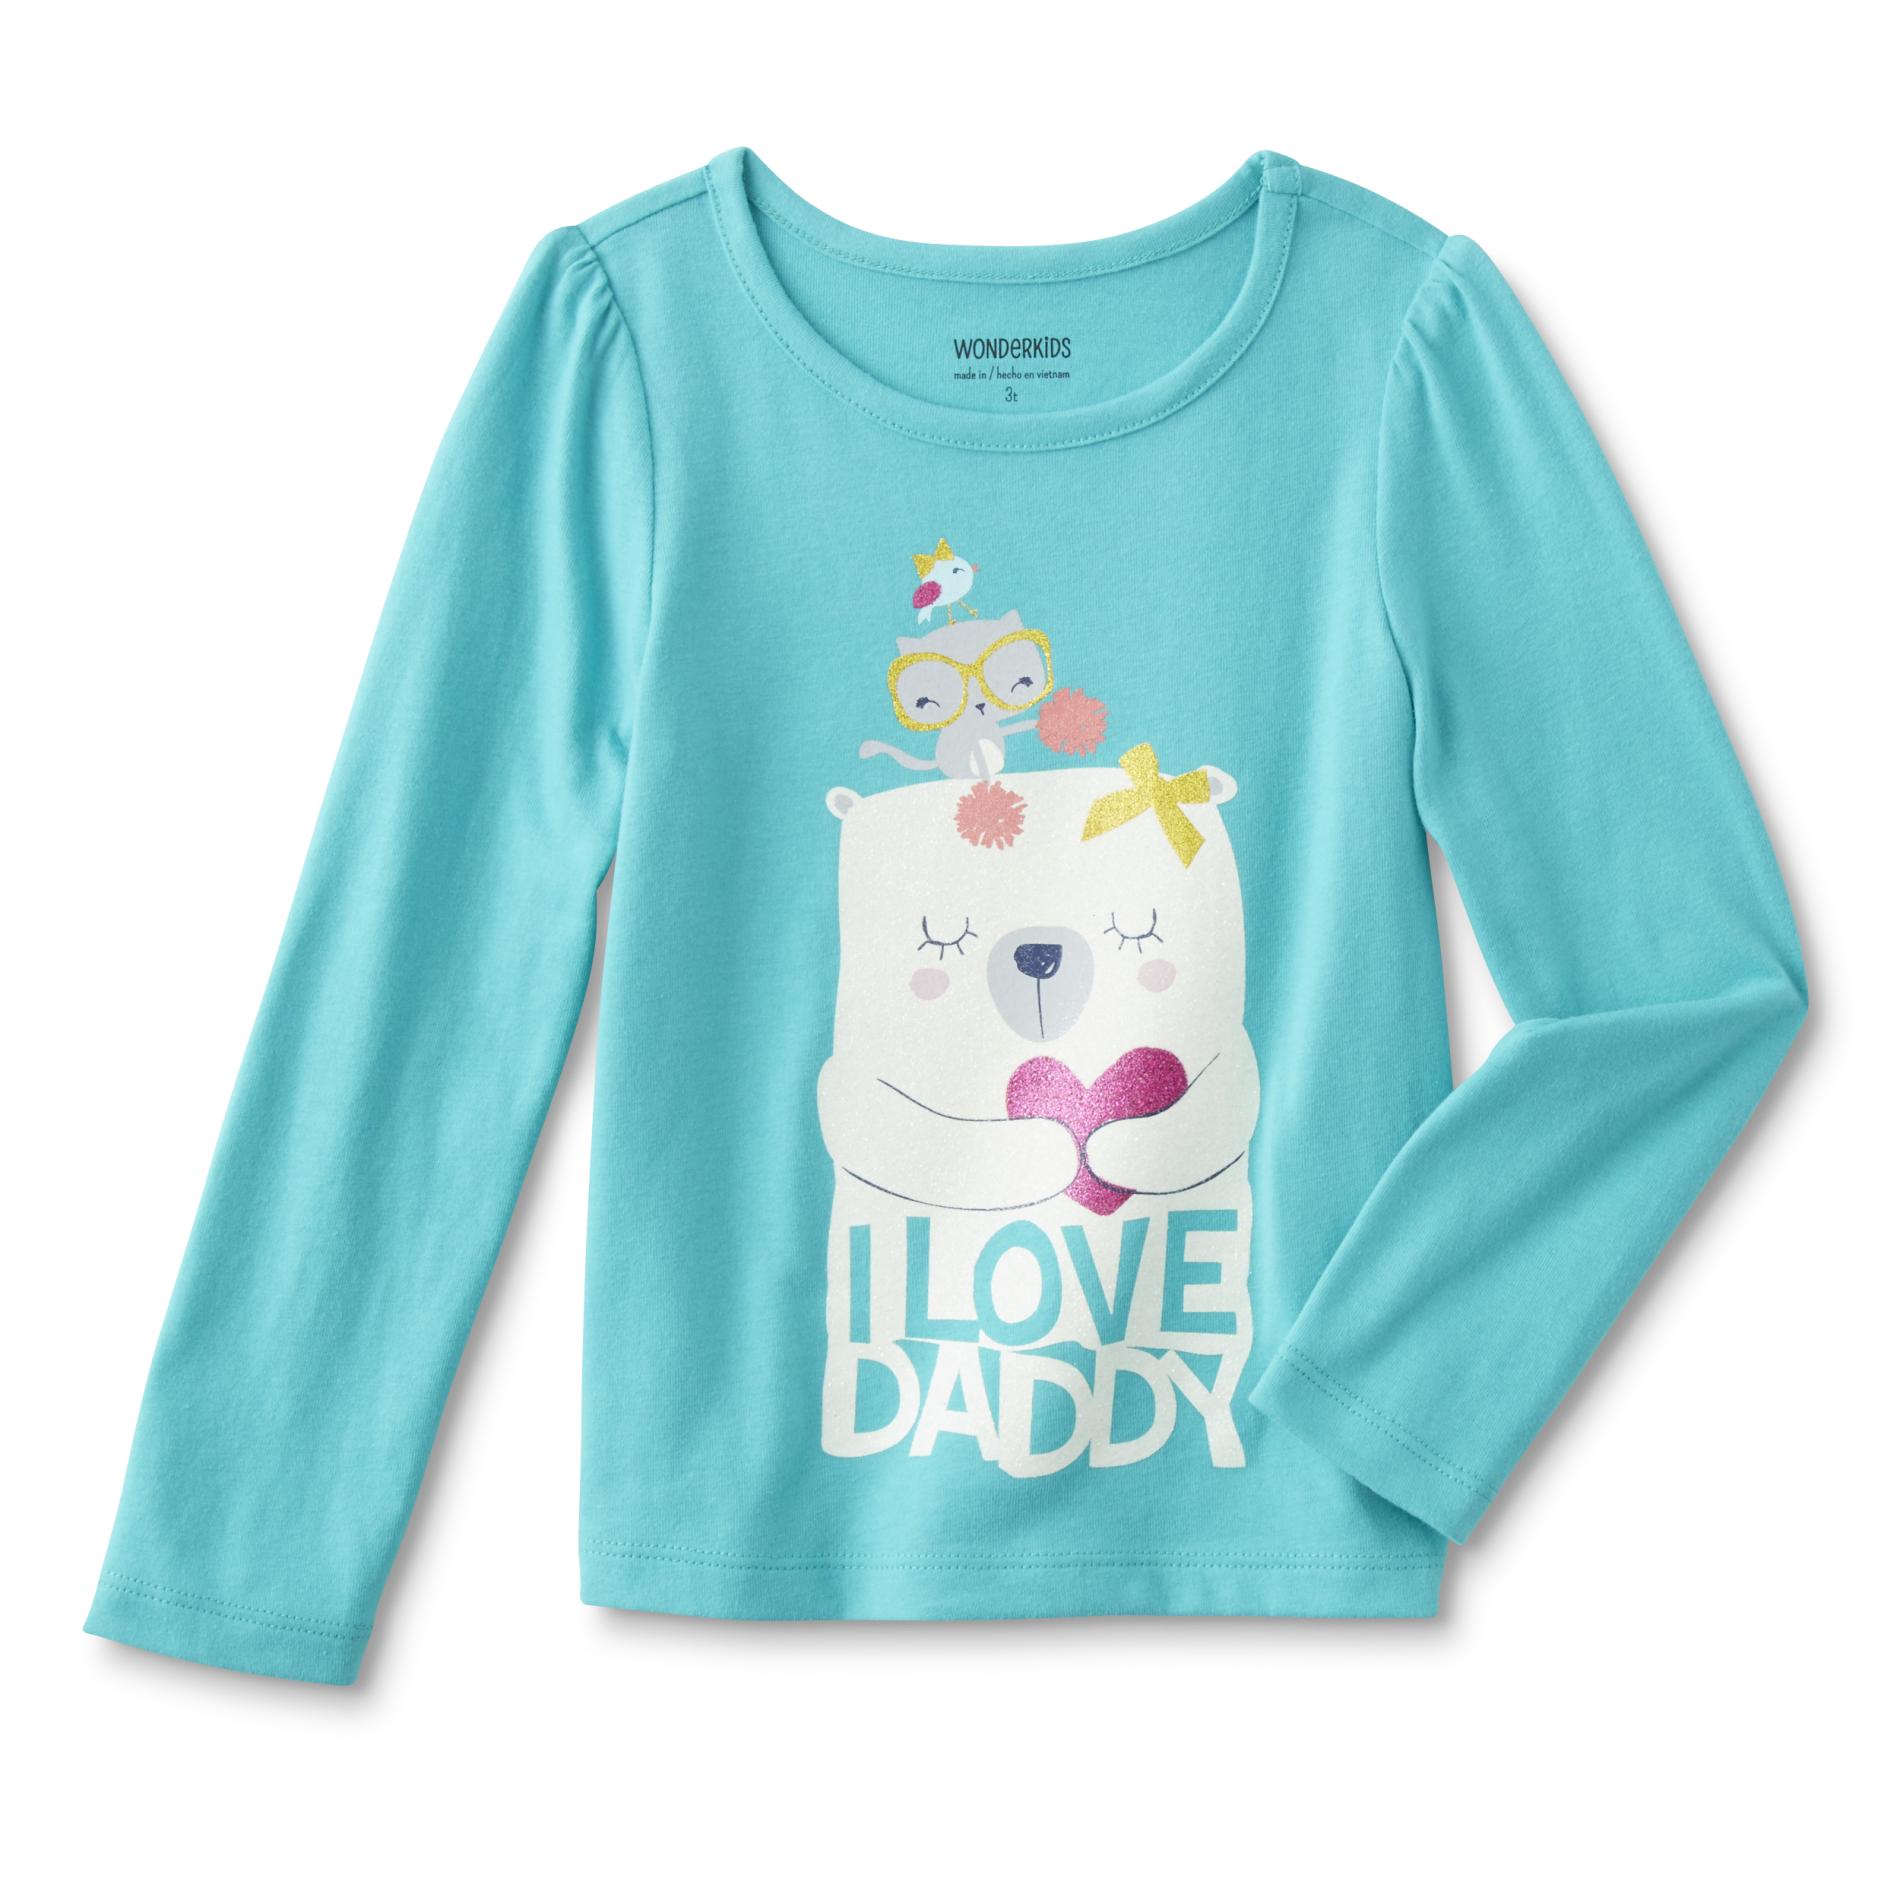 WonderKids Infant & Toddler Girl's Graphic T-Shirt - I Love Daddy